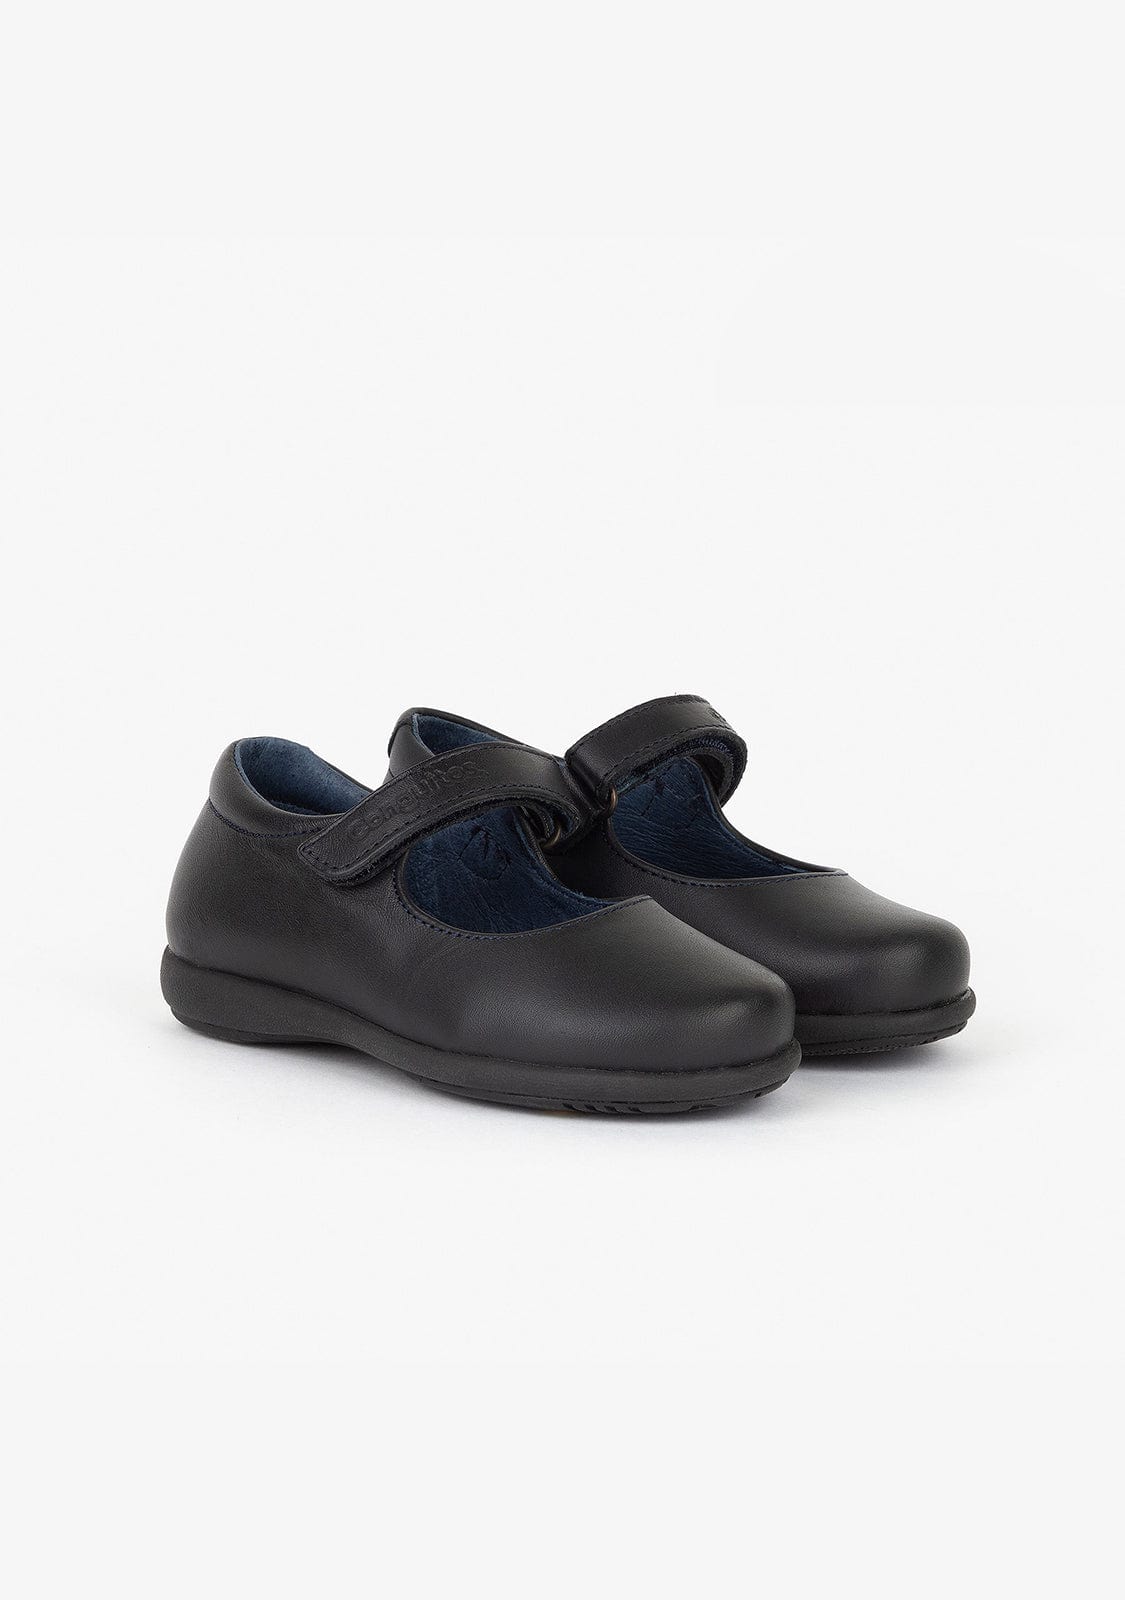 CONGUITOS Shoes Girl's Navy School Shoes